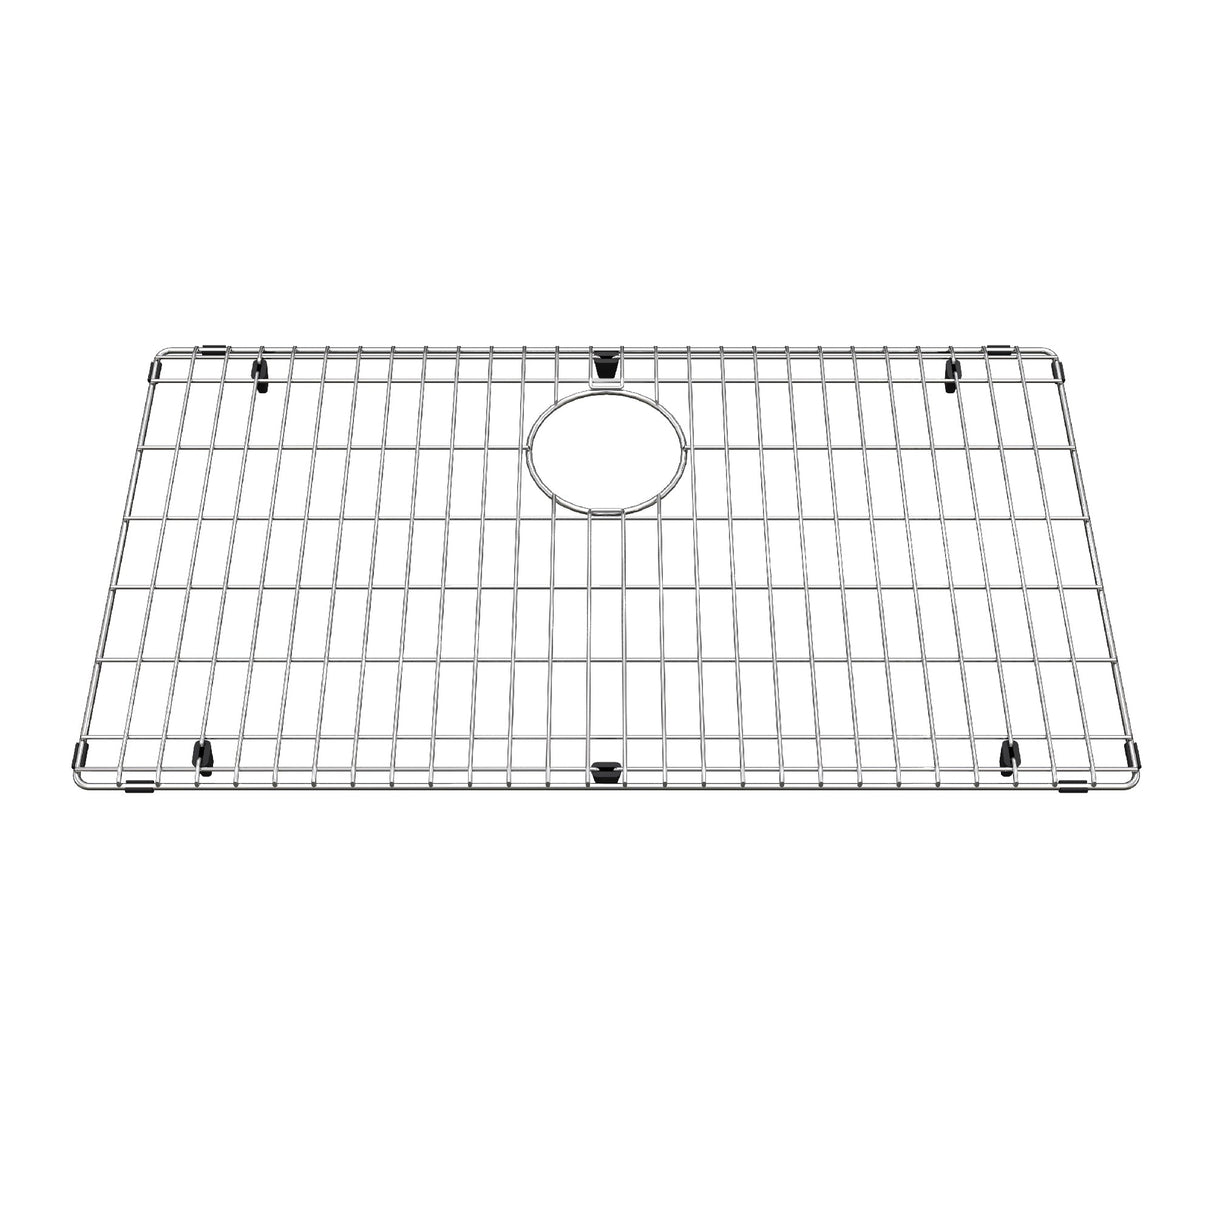 KINDRED BG529S Stainless Steel Bottom Grid for Sink 15-in x 27.5-in In Stainless Steel